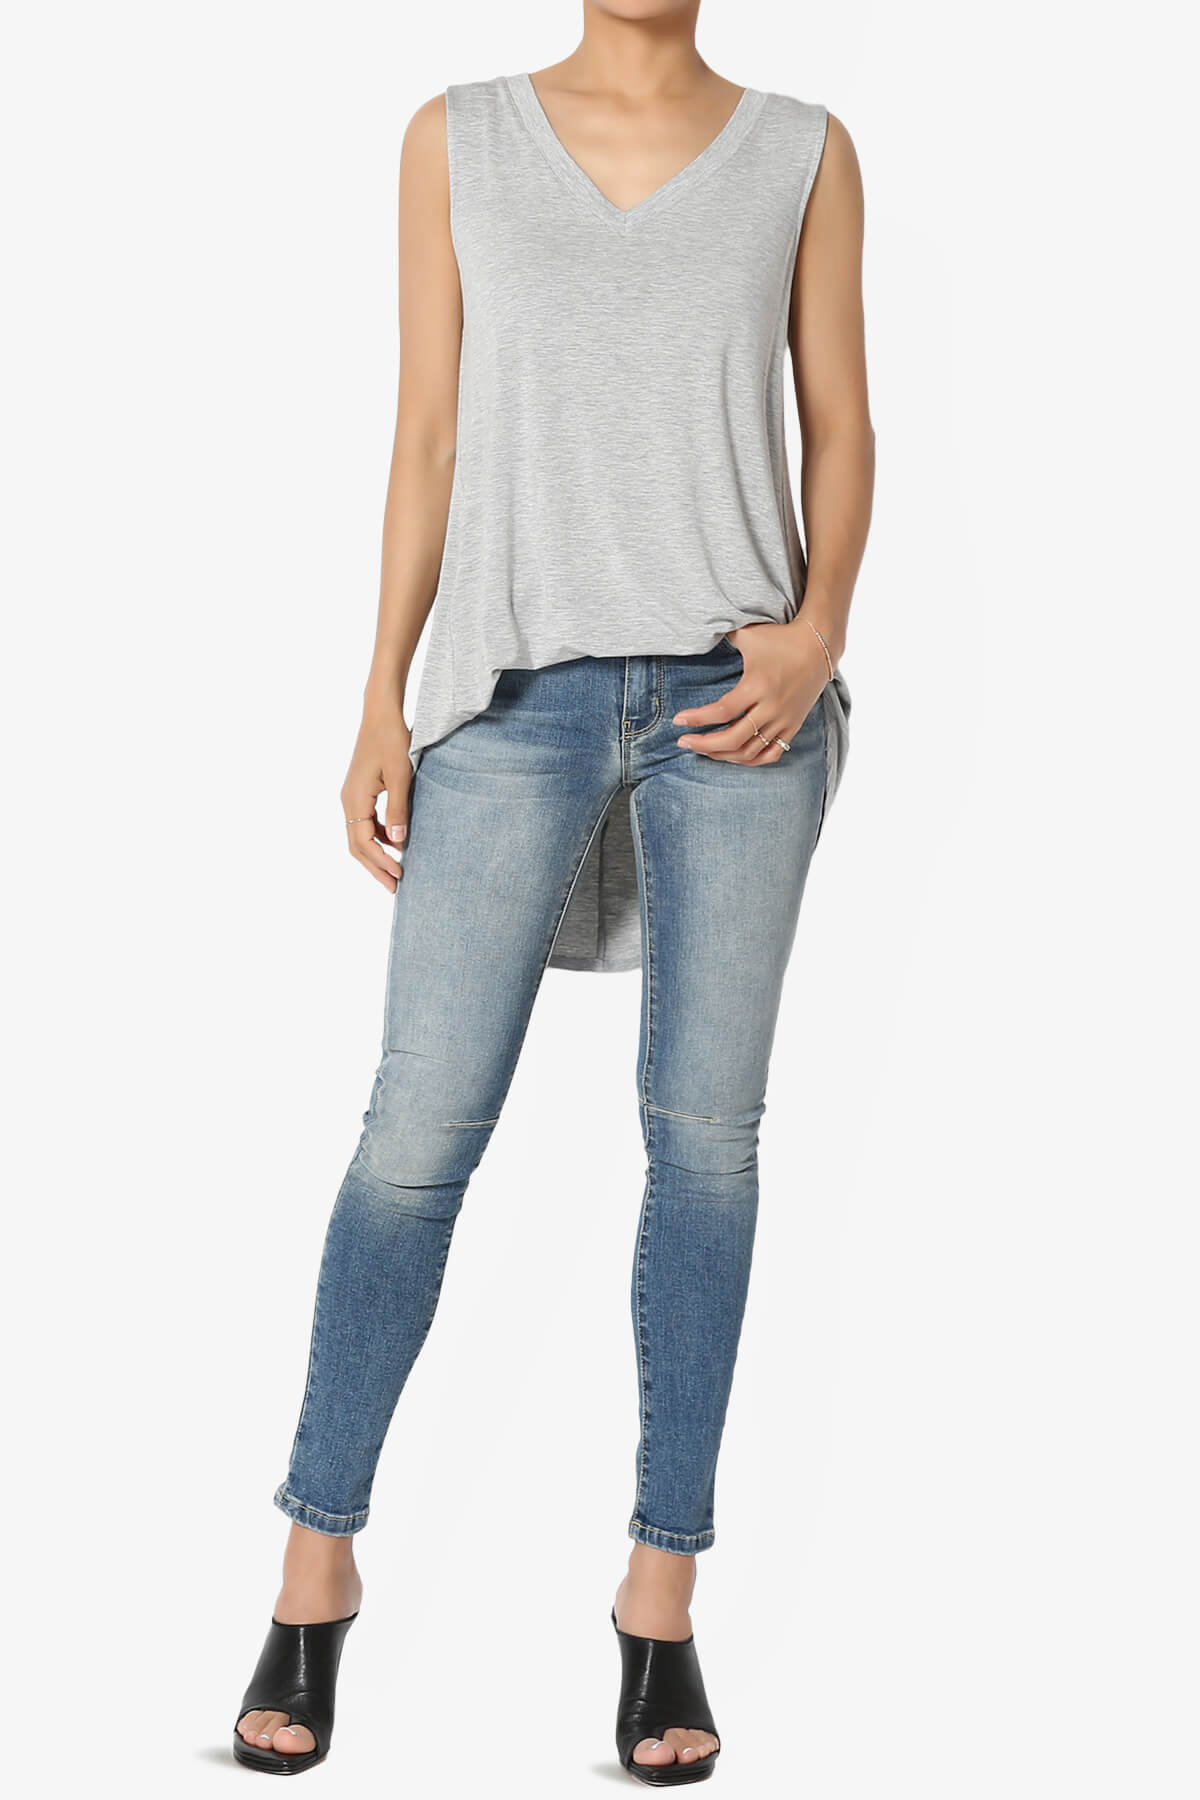 Load image into Gallery viewer, Myles Sleeveless V-Neck Luxe Jersey Top HEATHER GREY_6
